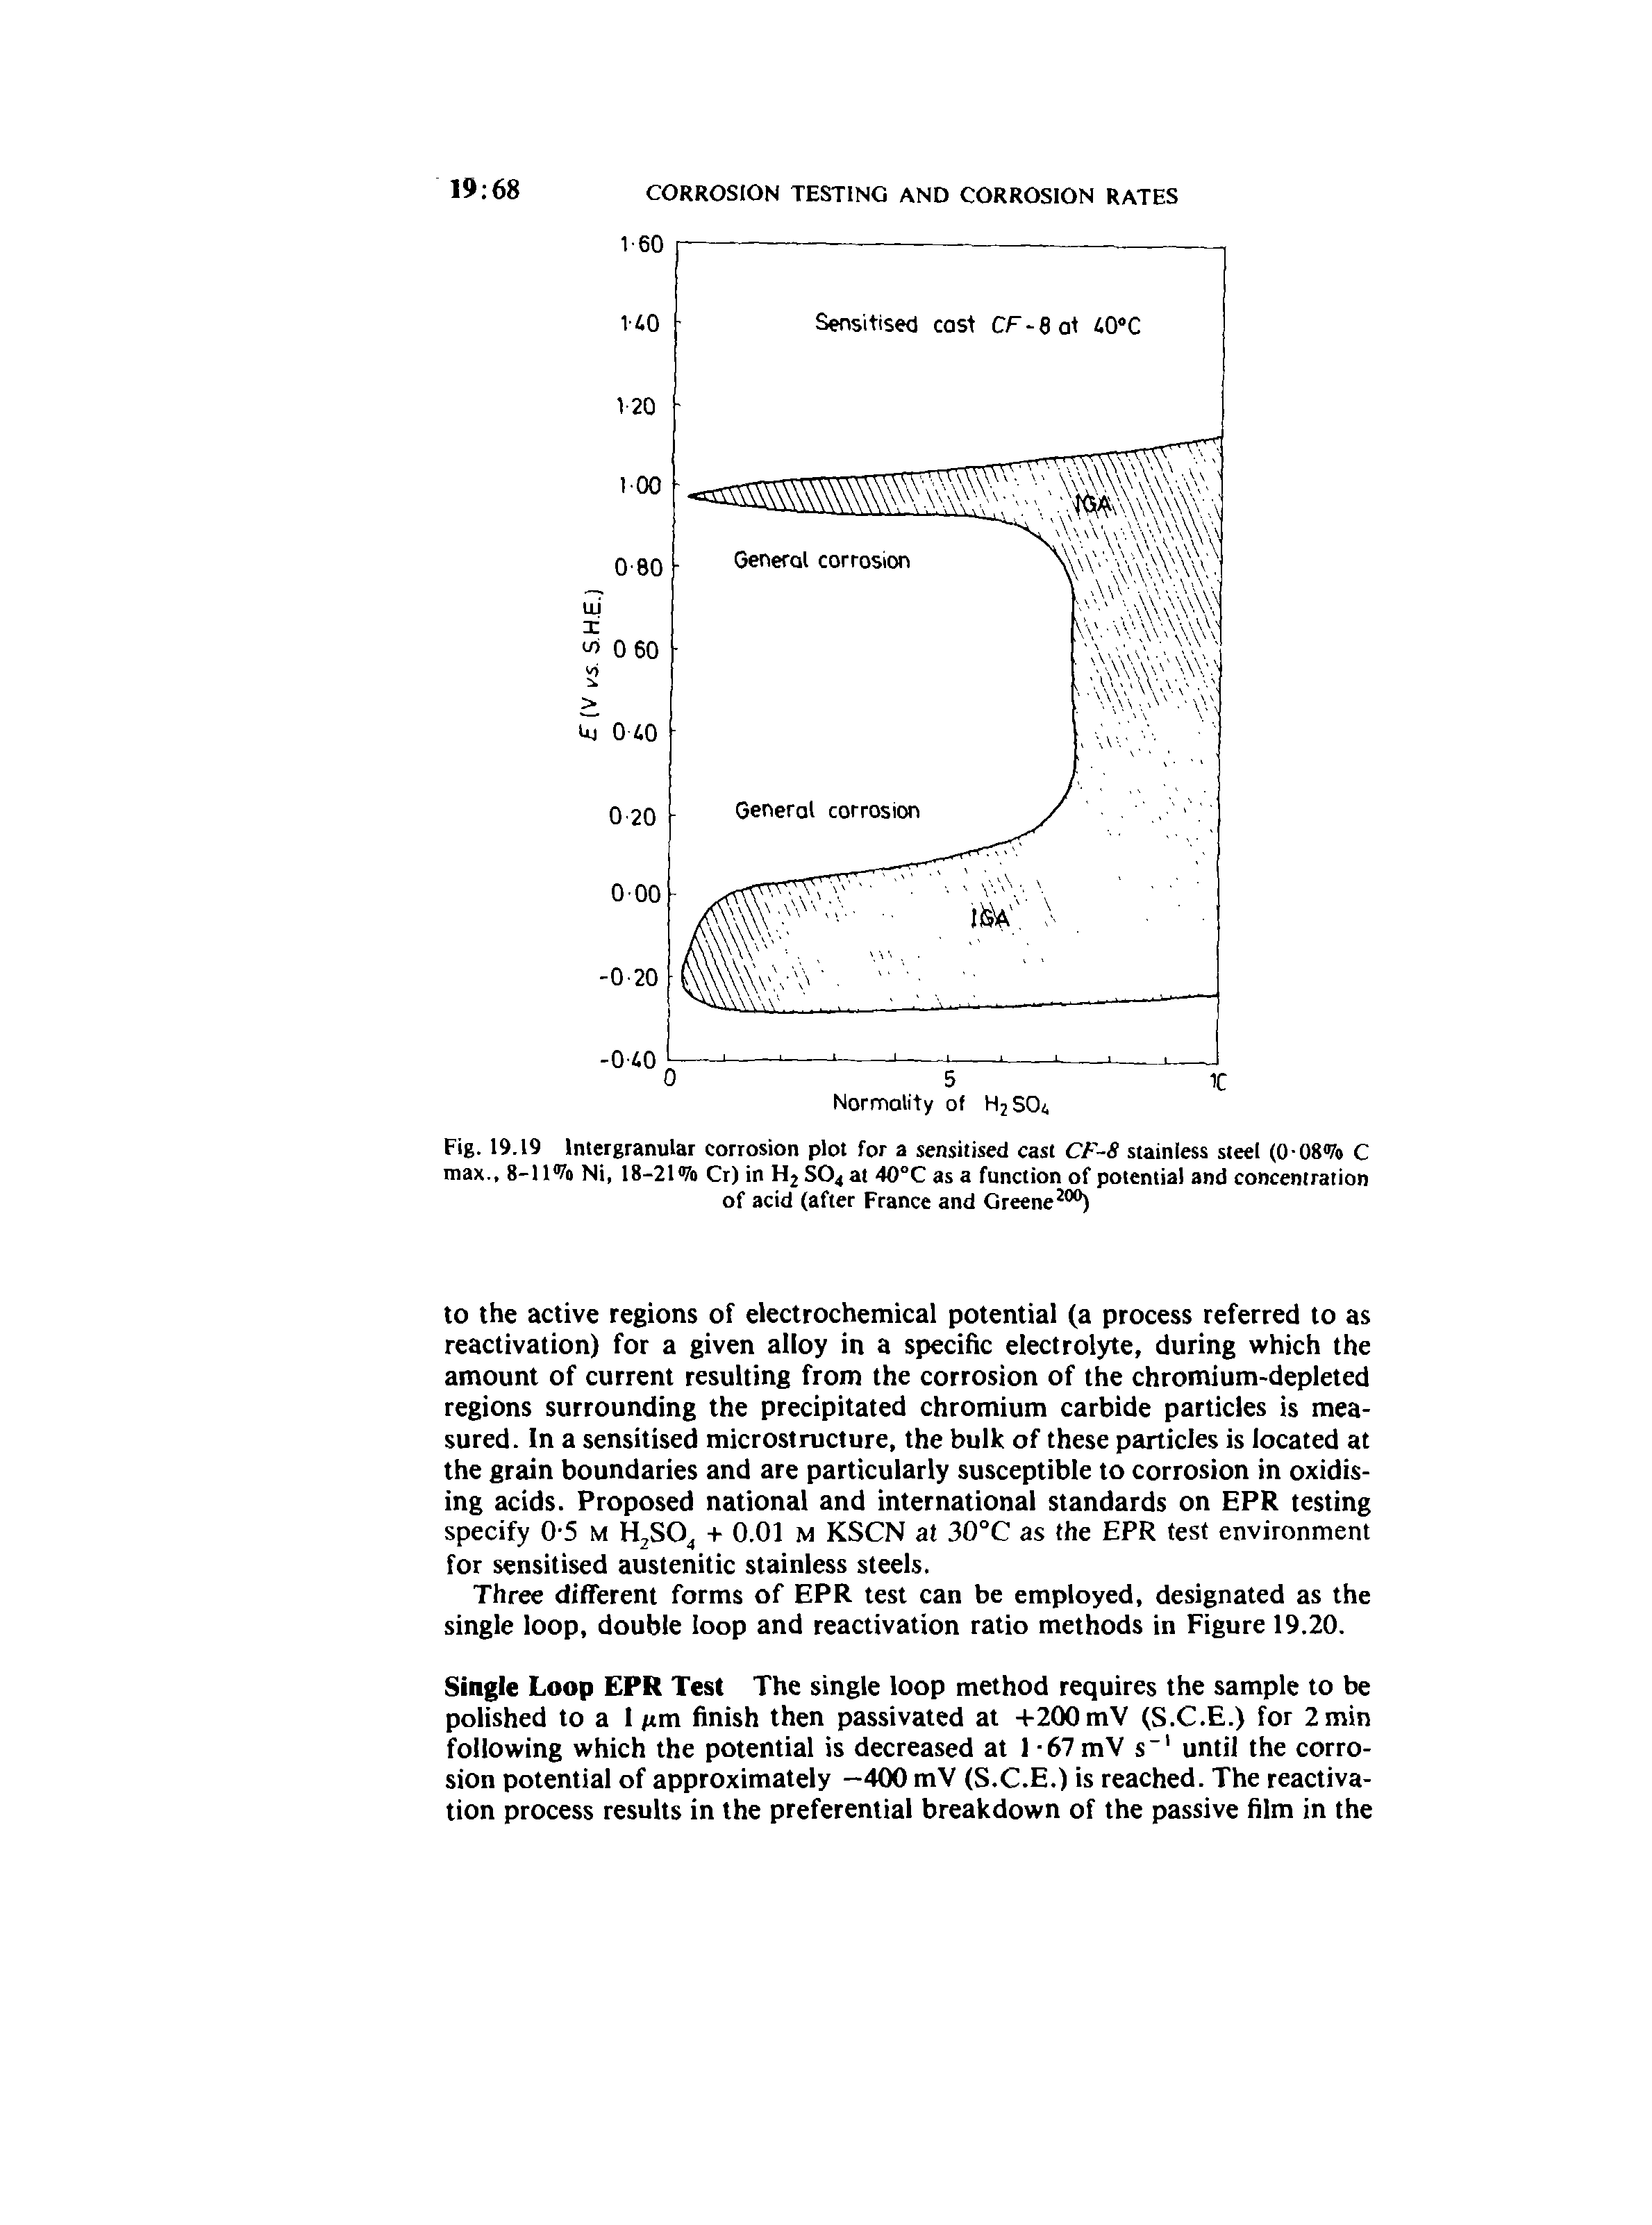 Fig. 19.19 Intergranular corrosion plot for a sensitised cast CF-S stainless steel (0 08 7o C max., 8-11% Ni, 18-21% Cr) in H2 SO4 at 40°C as a function of potential and concentration of acid (after France and Greene )...